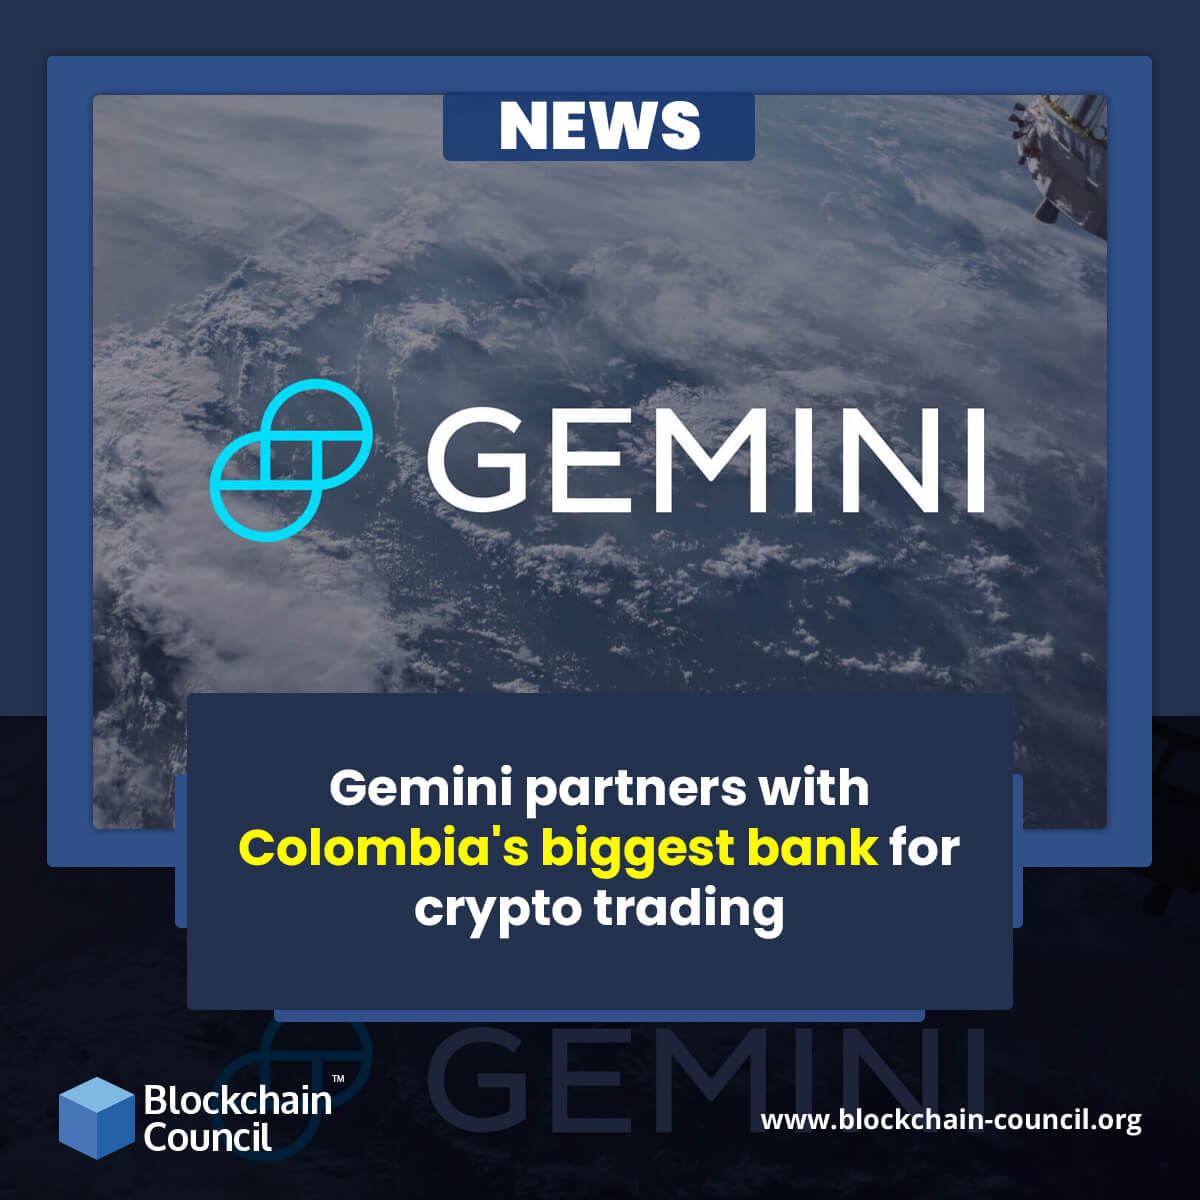 Gemini partners with Colombia's biggest bank for crypto trading